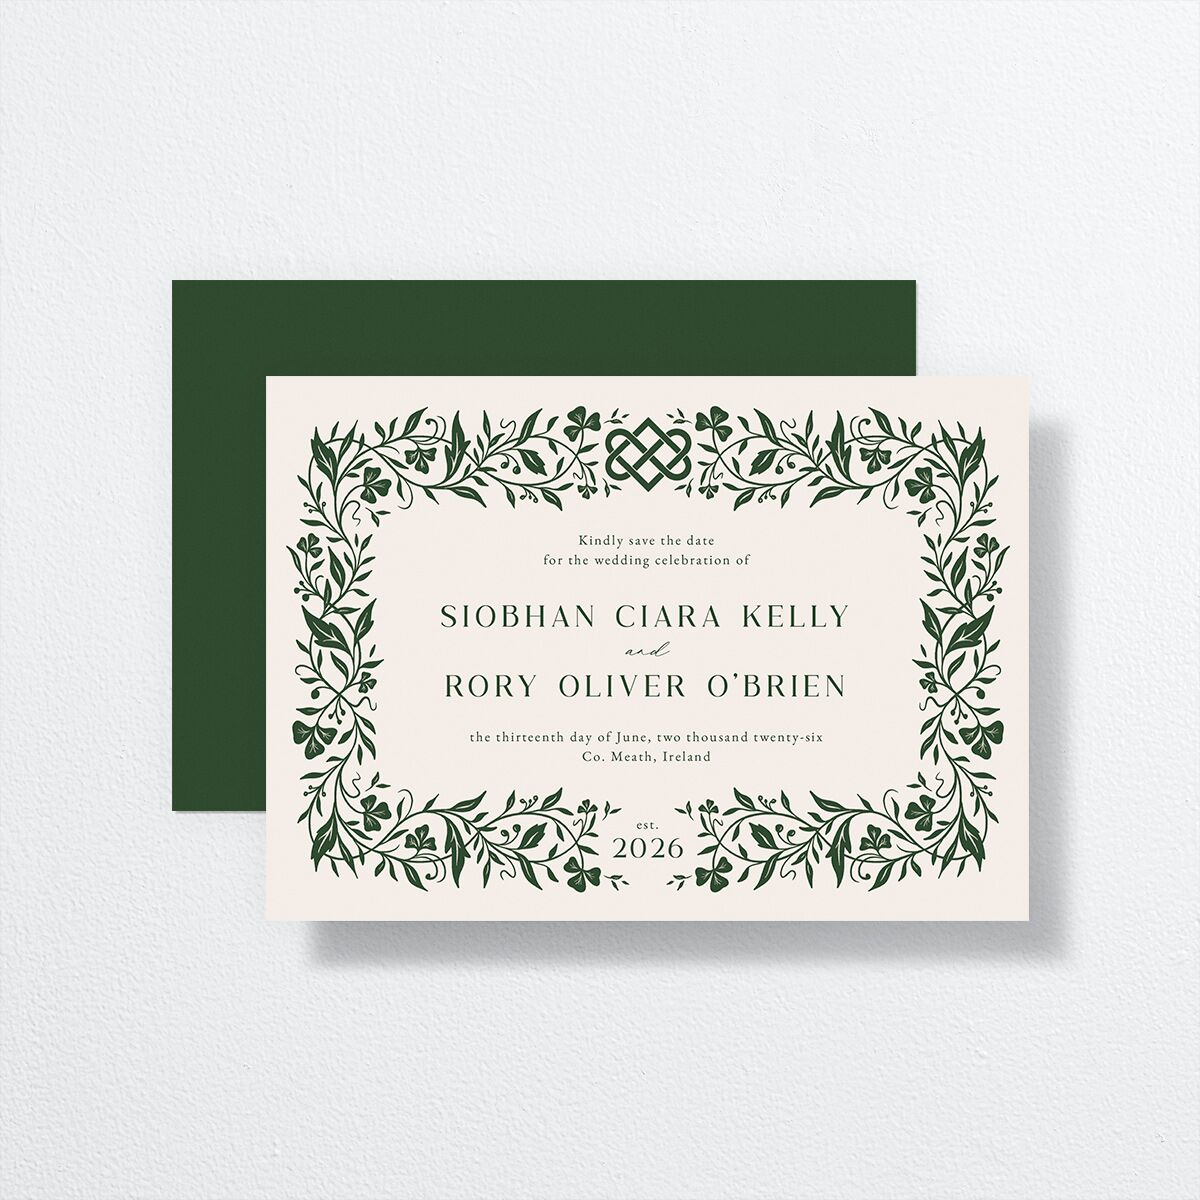 Celtic Knot Save the Date Cards front-and-back in Green